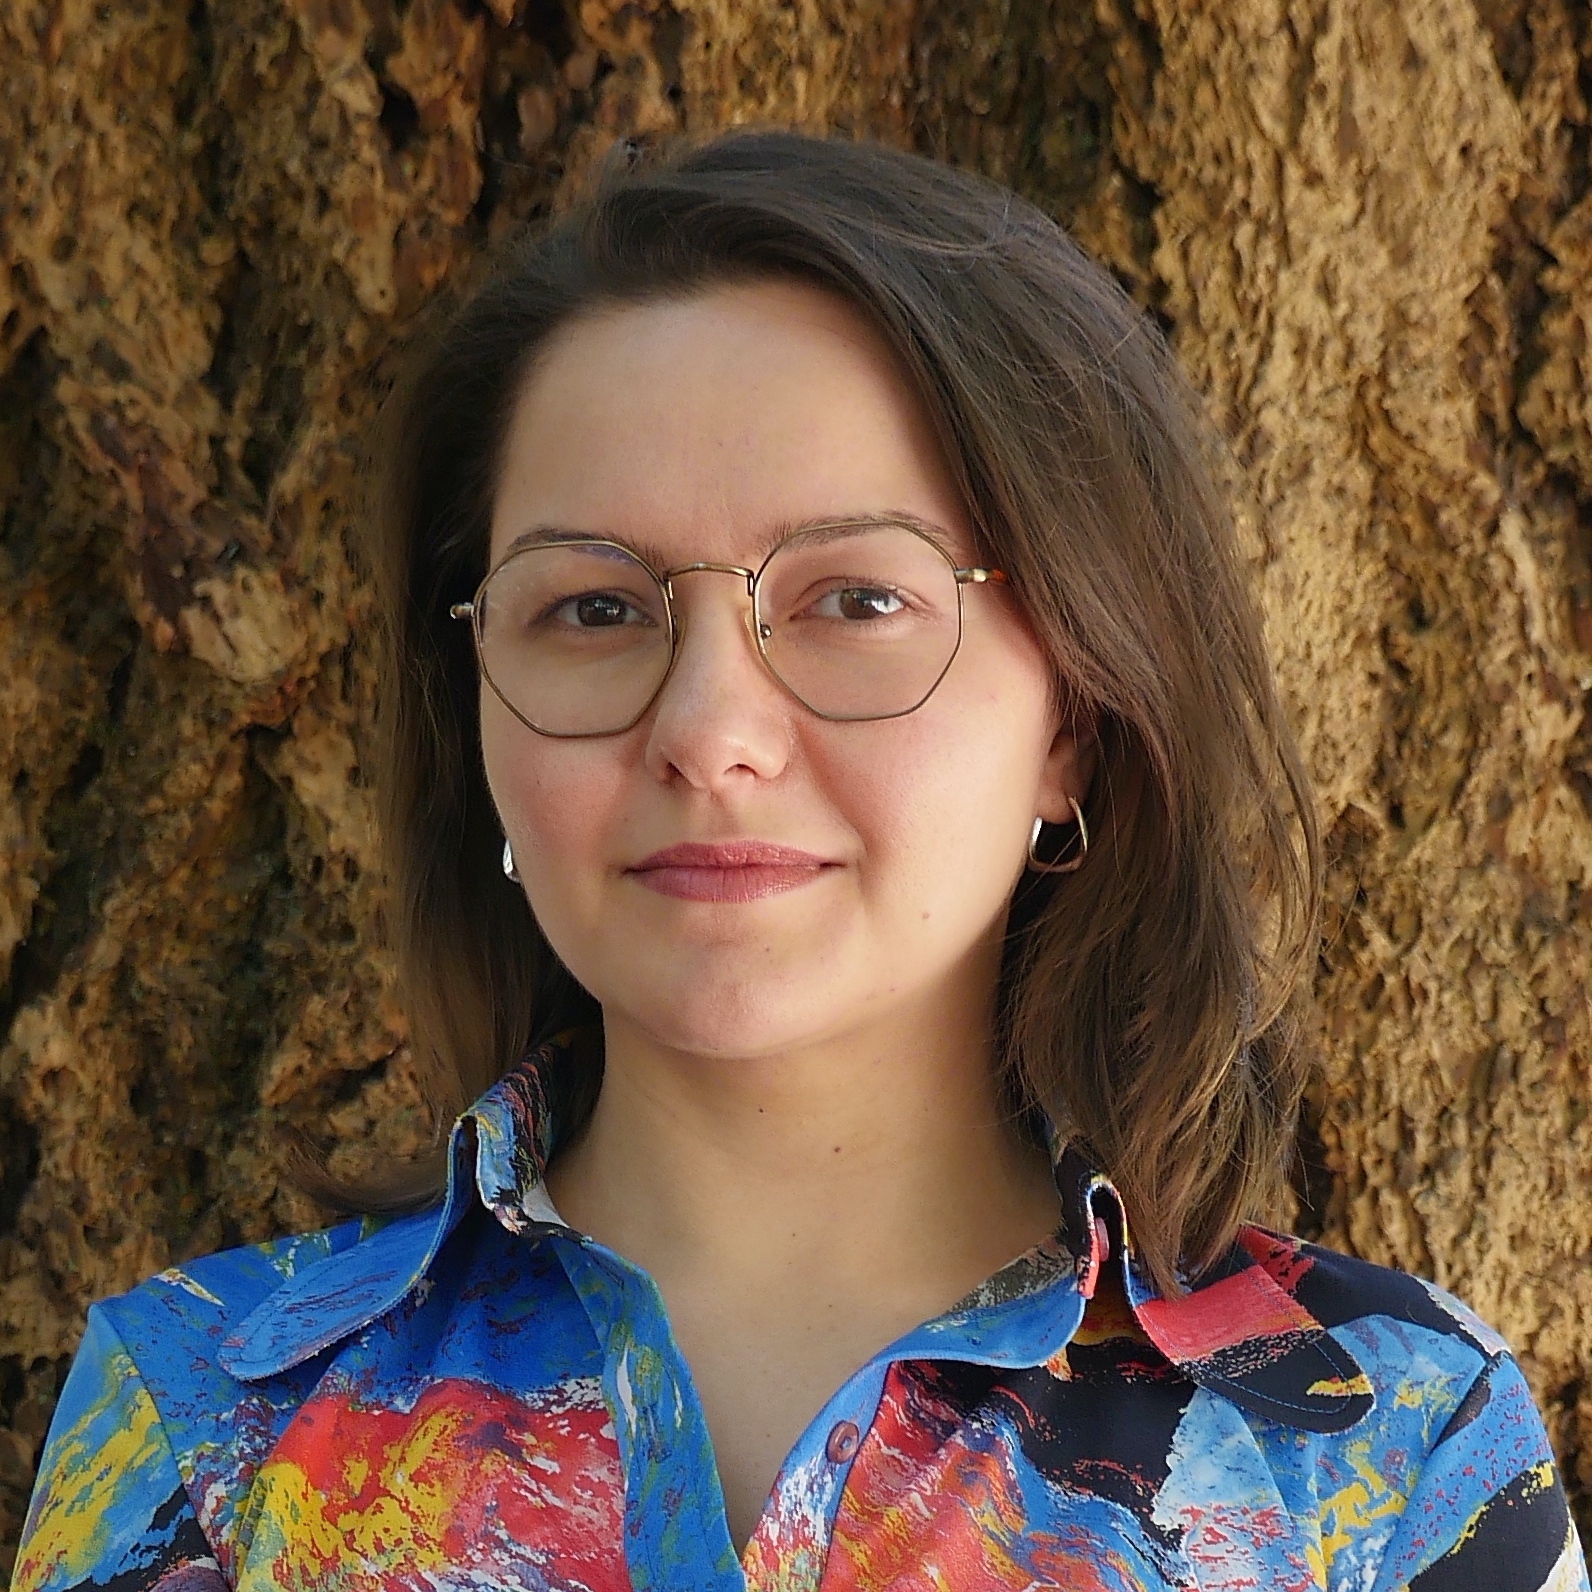 Özgün is pictured from the shoulders up in front of the trunk of a tree. She is looking at the camera and smiling with her mouth closed. She wears glasses and a brightly coloured shirt.